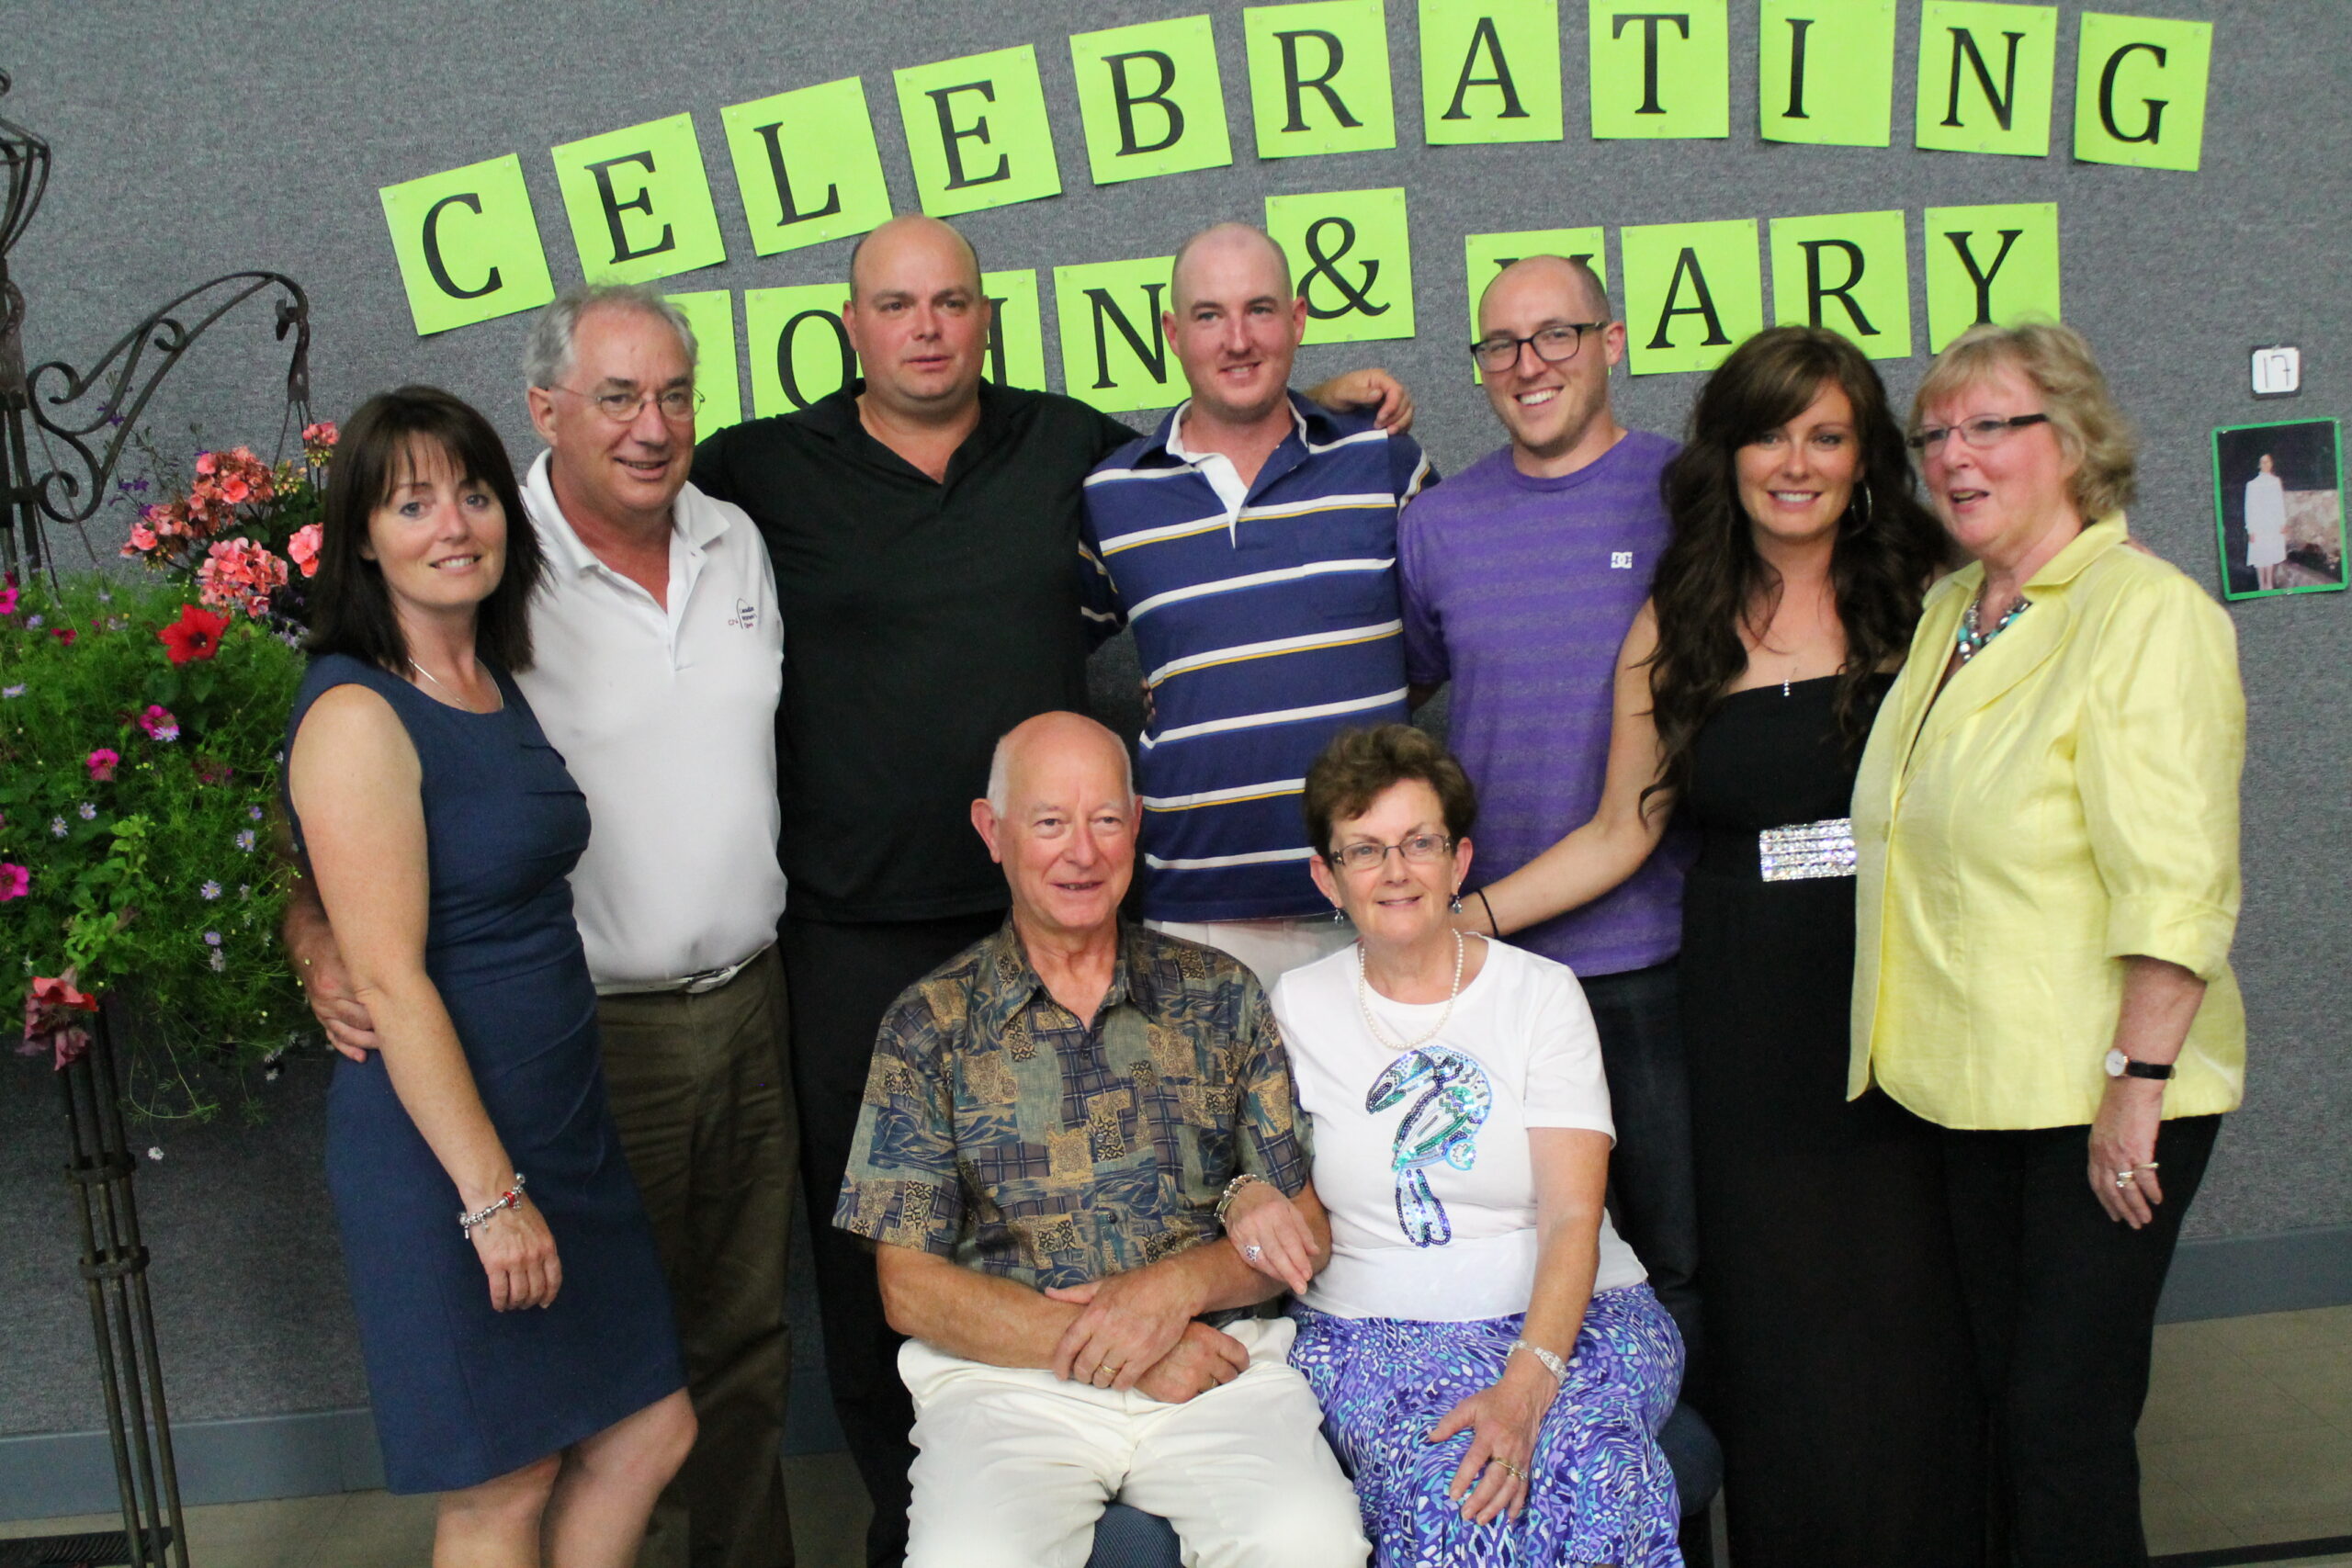 Celebrating John and Mary`s 70 birthday .Ruth . arys brother Gerard dillon our son Edward , nephews Brendan and Mark Dillon Daughter sheena sister-in-law Martina Dillon